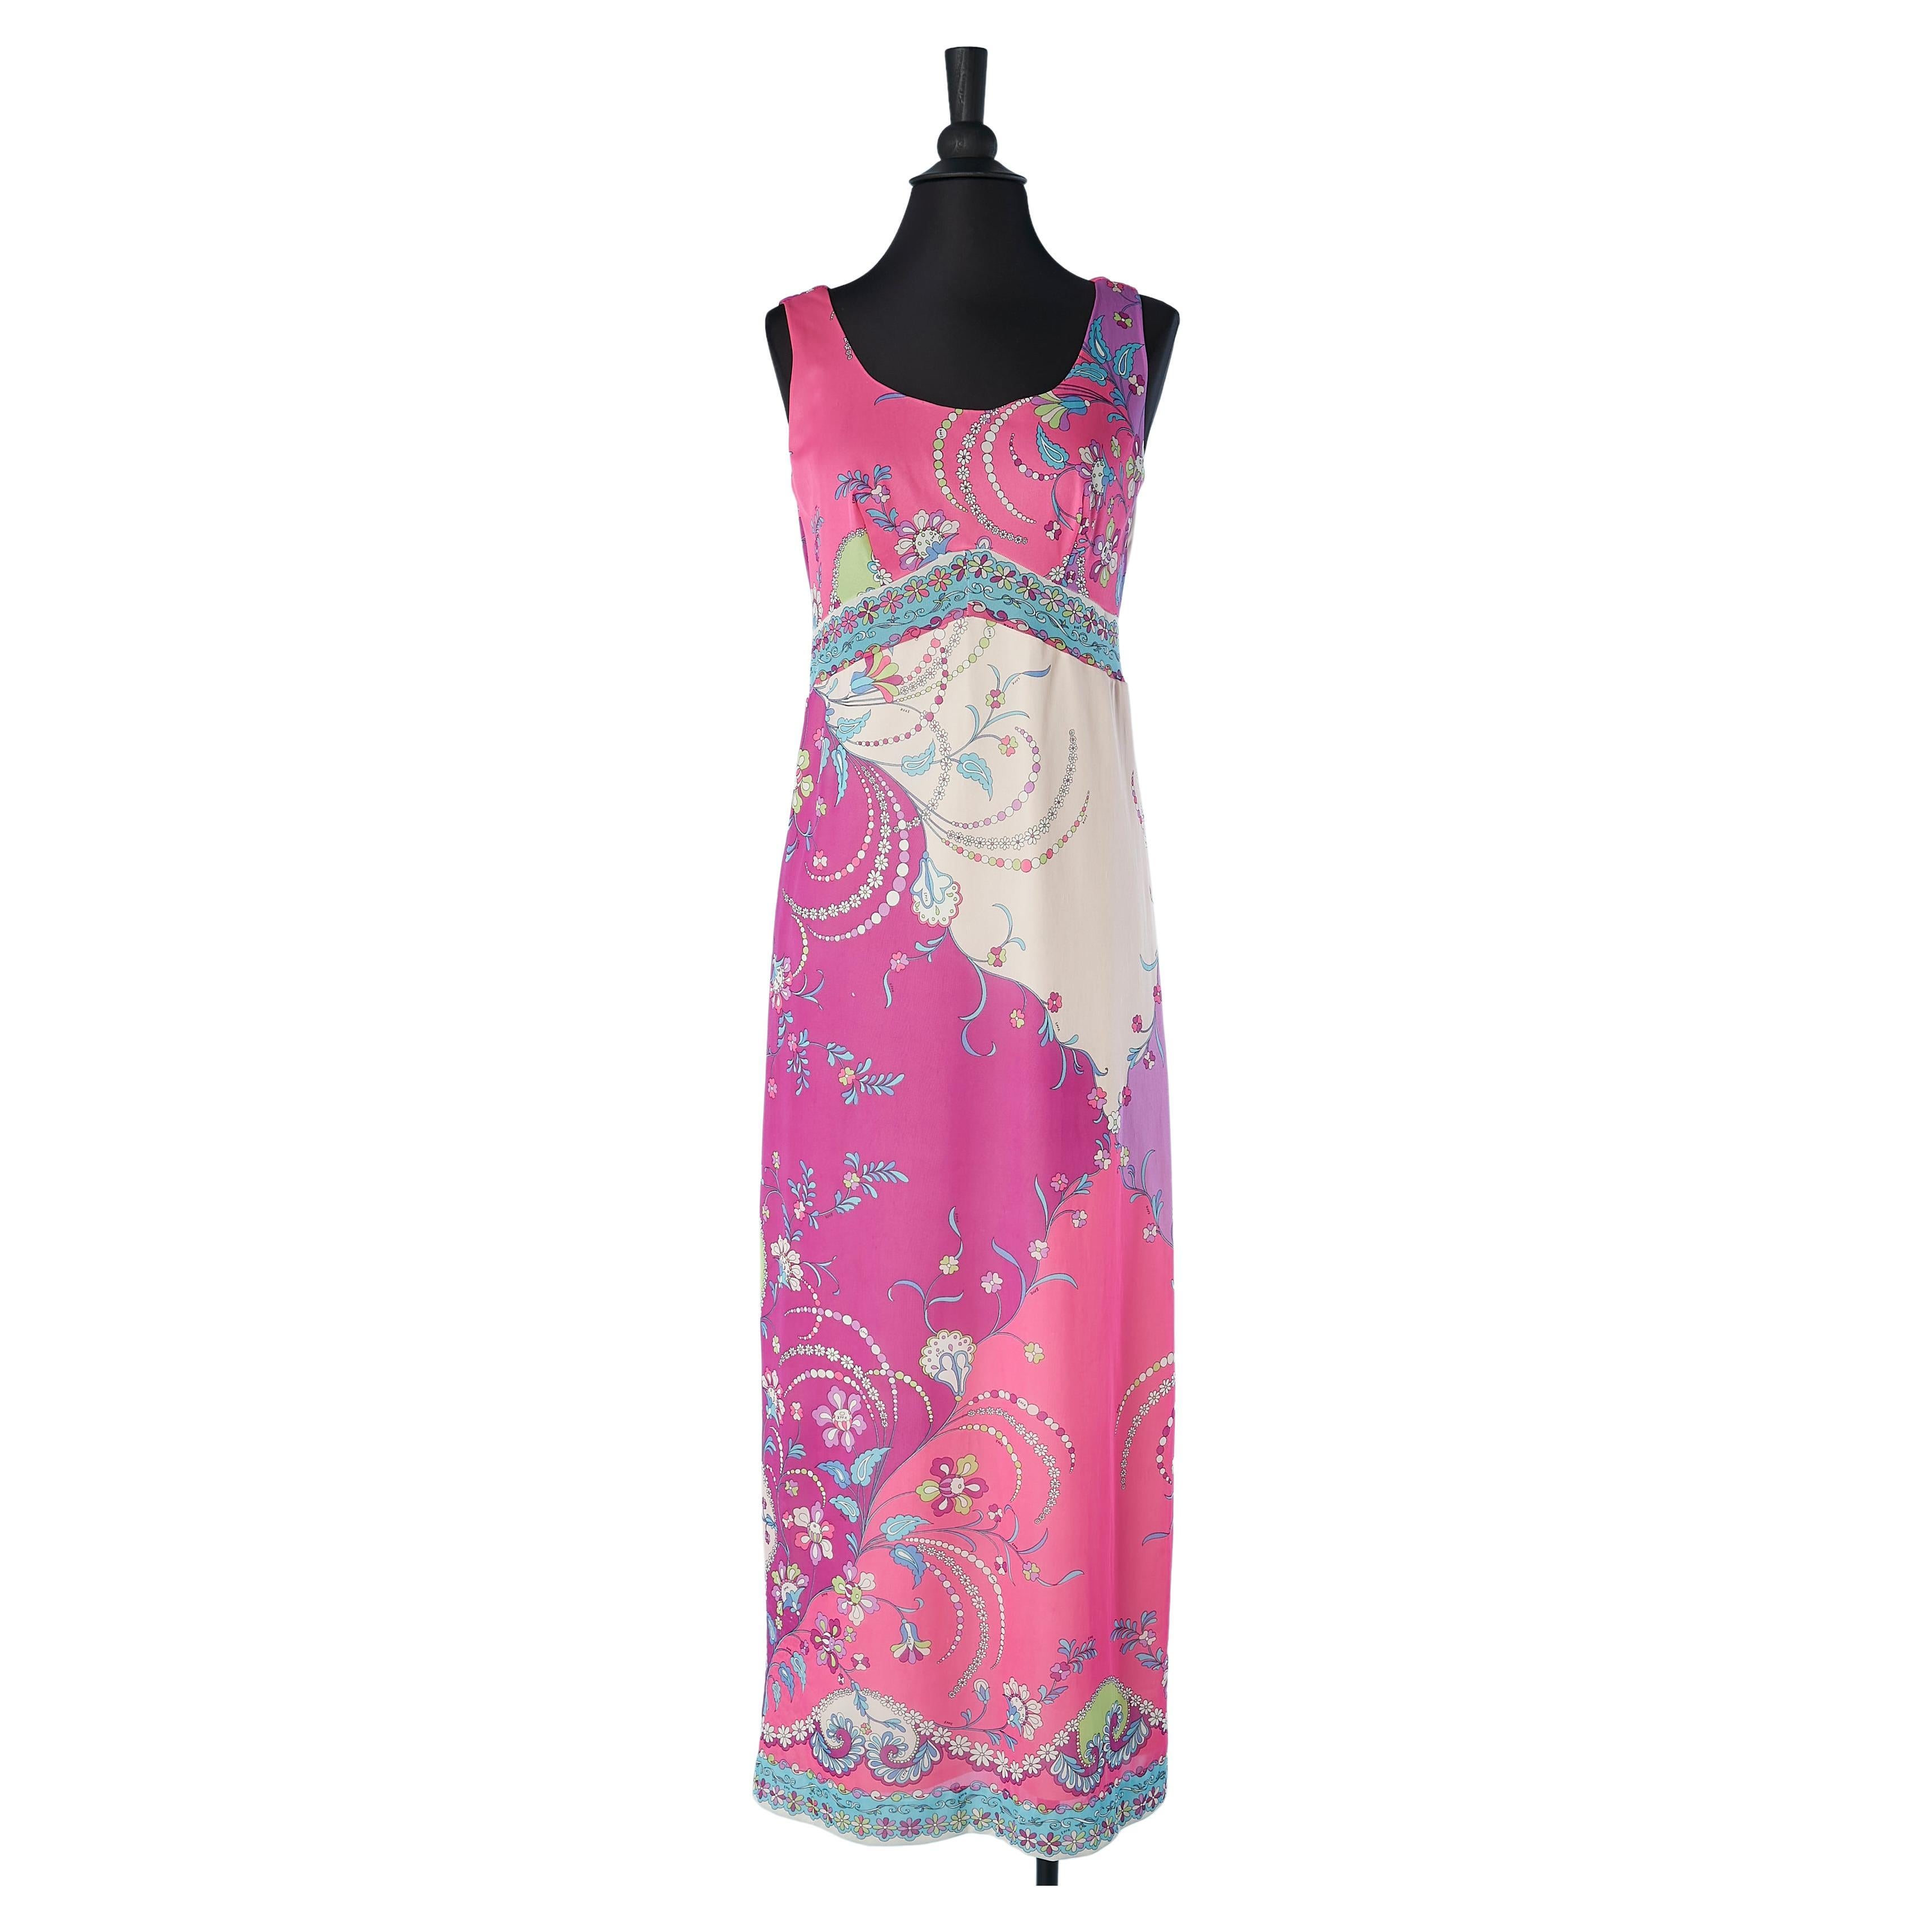 Long sleeveless printed jersey dress Emilio Pucci for Formfit Rodgers Circa 1960